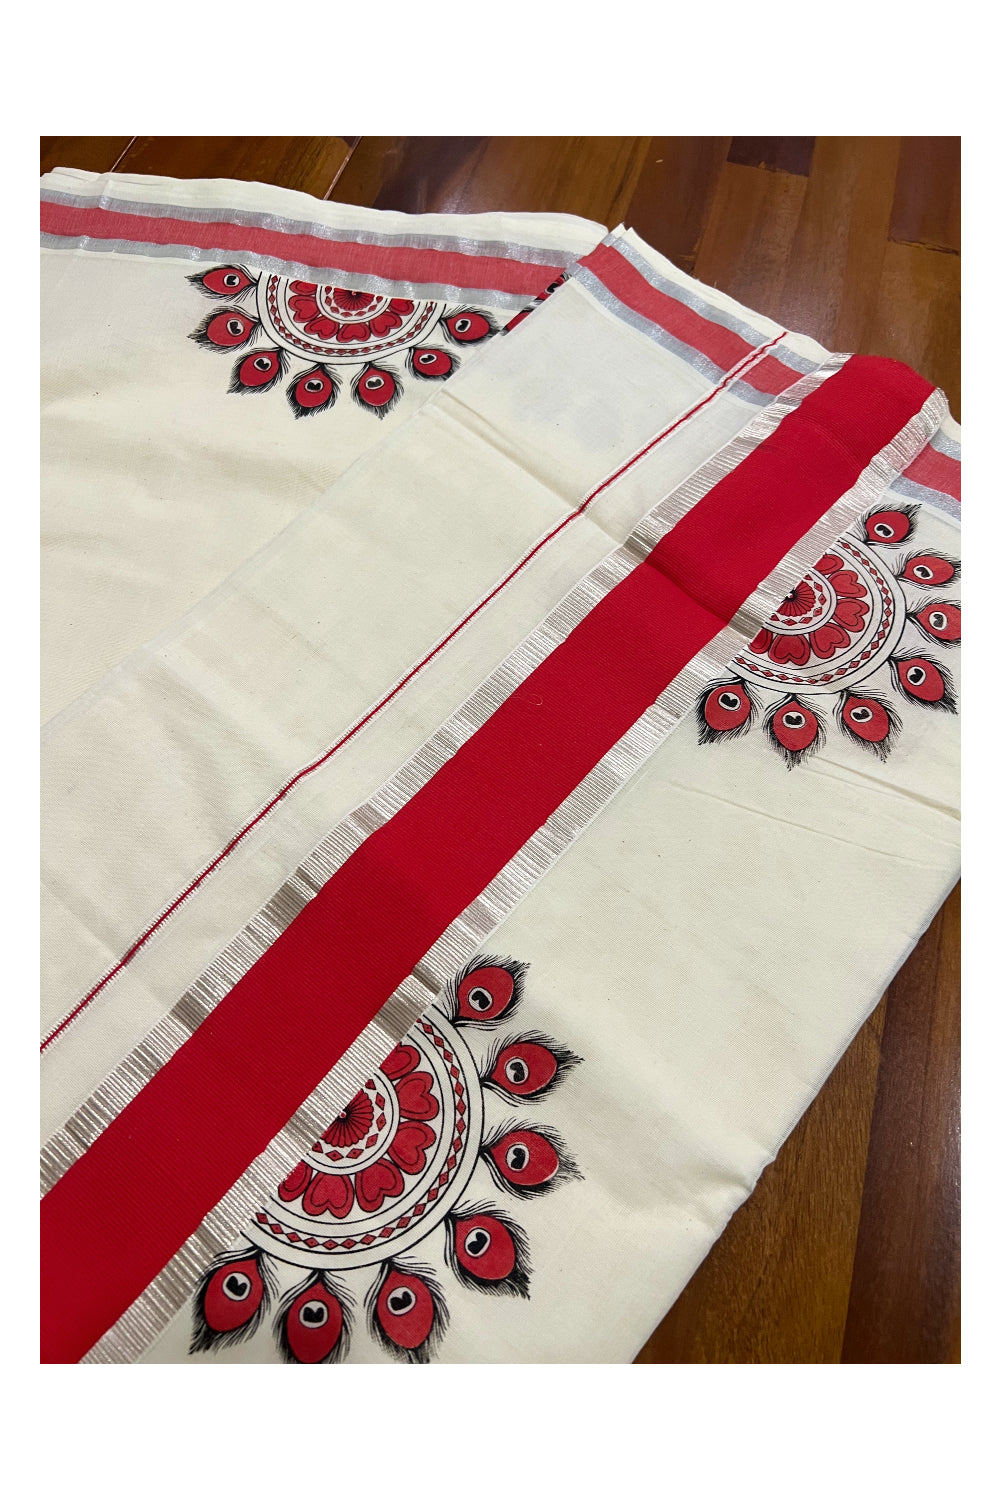 Pure Cotton Kerala Saree with Mural Printed Red Feather Semi Circle in Red and Silver Kasavu Border